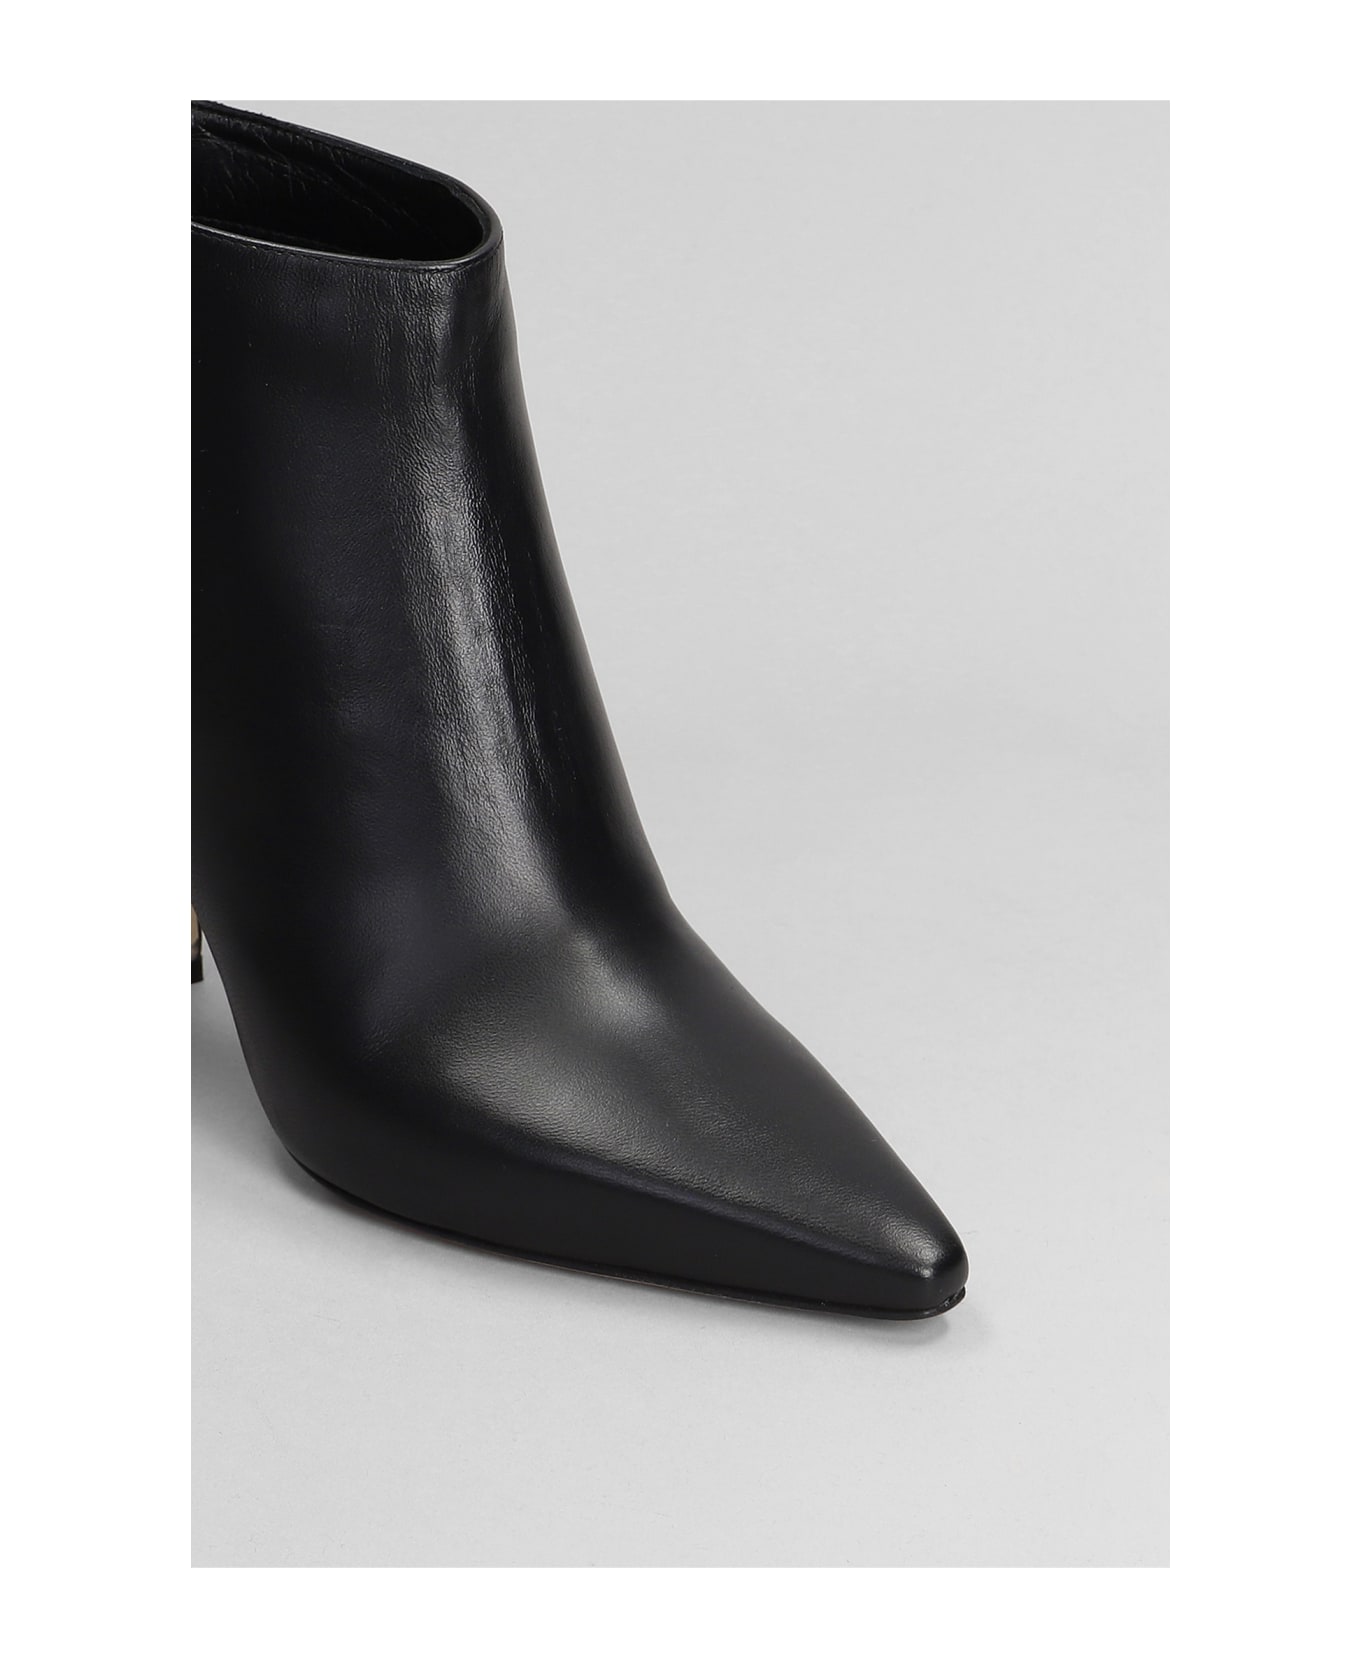 The Seller High Heels Ankle Boots In Black Leather - black ブーツ